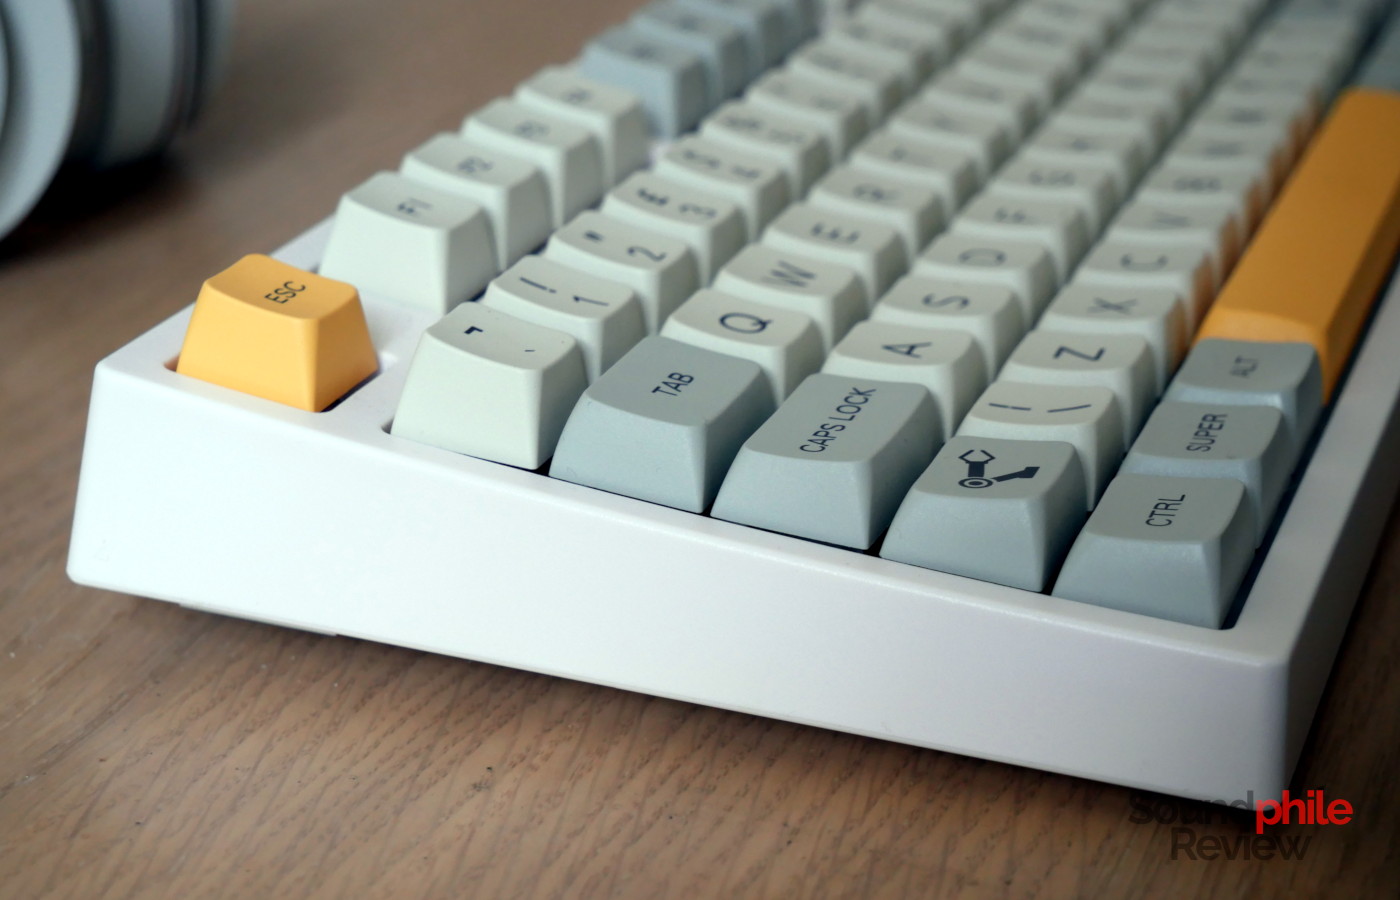 The Monet keycaps of the Epomaker TH80 Pro sport the MDA profile